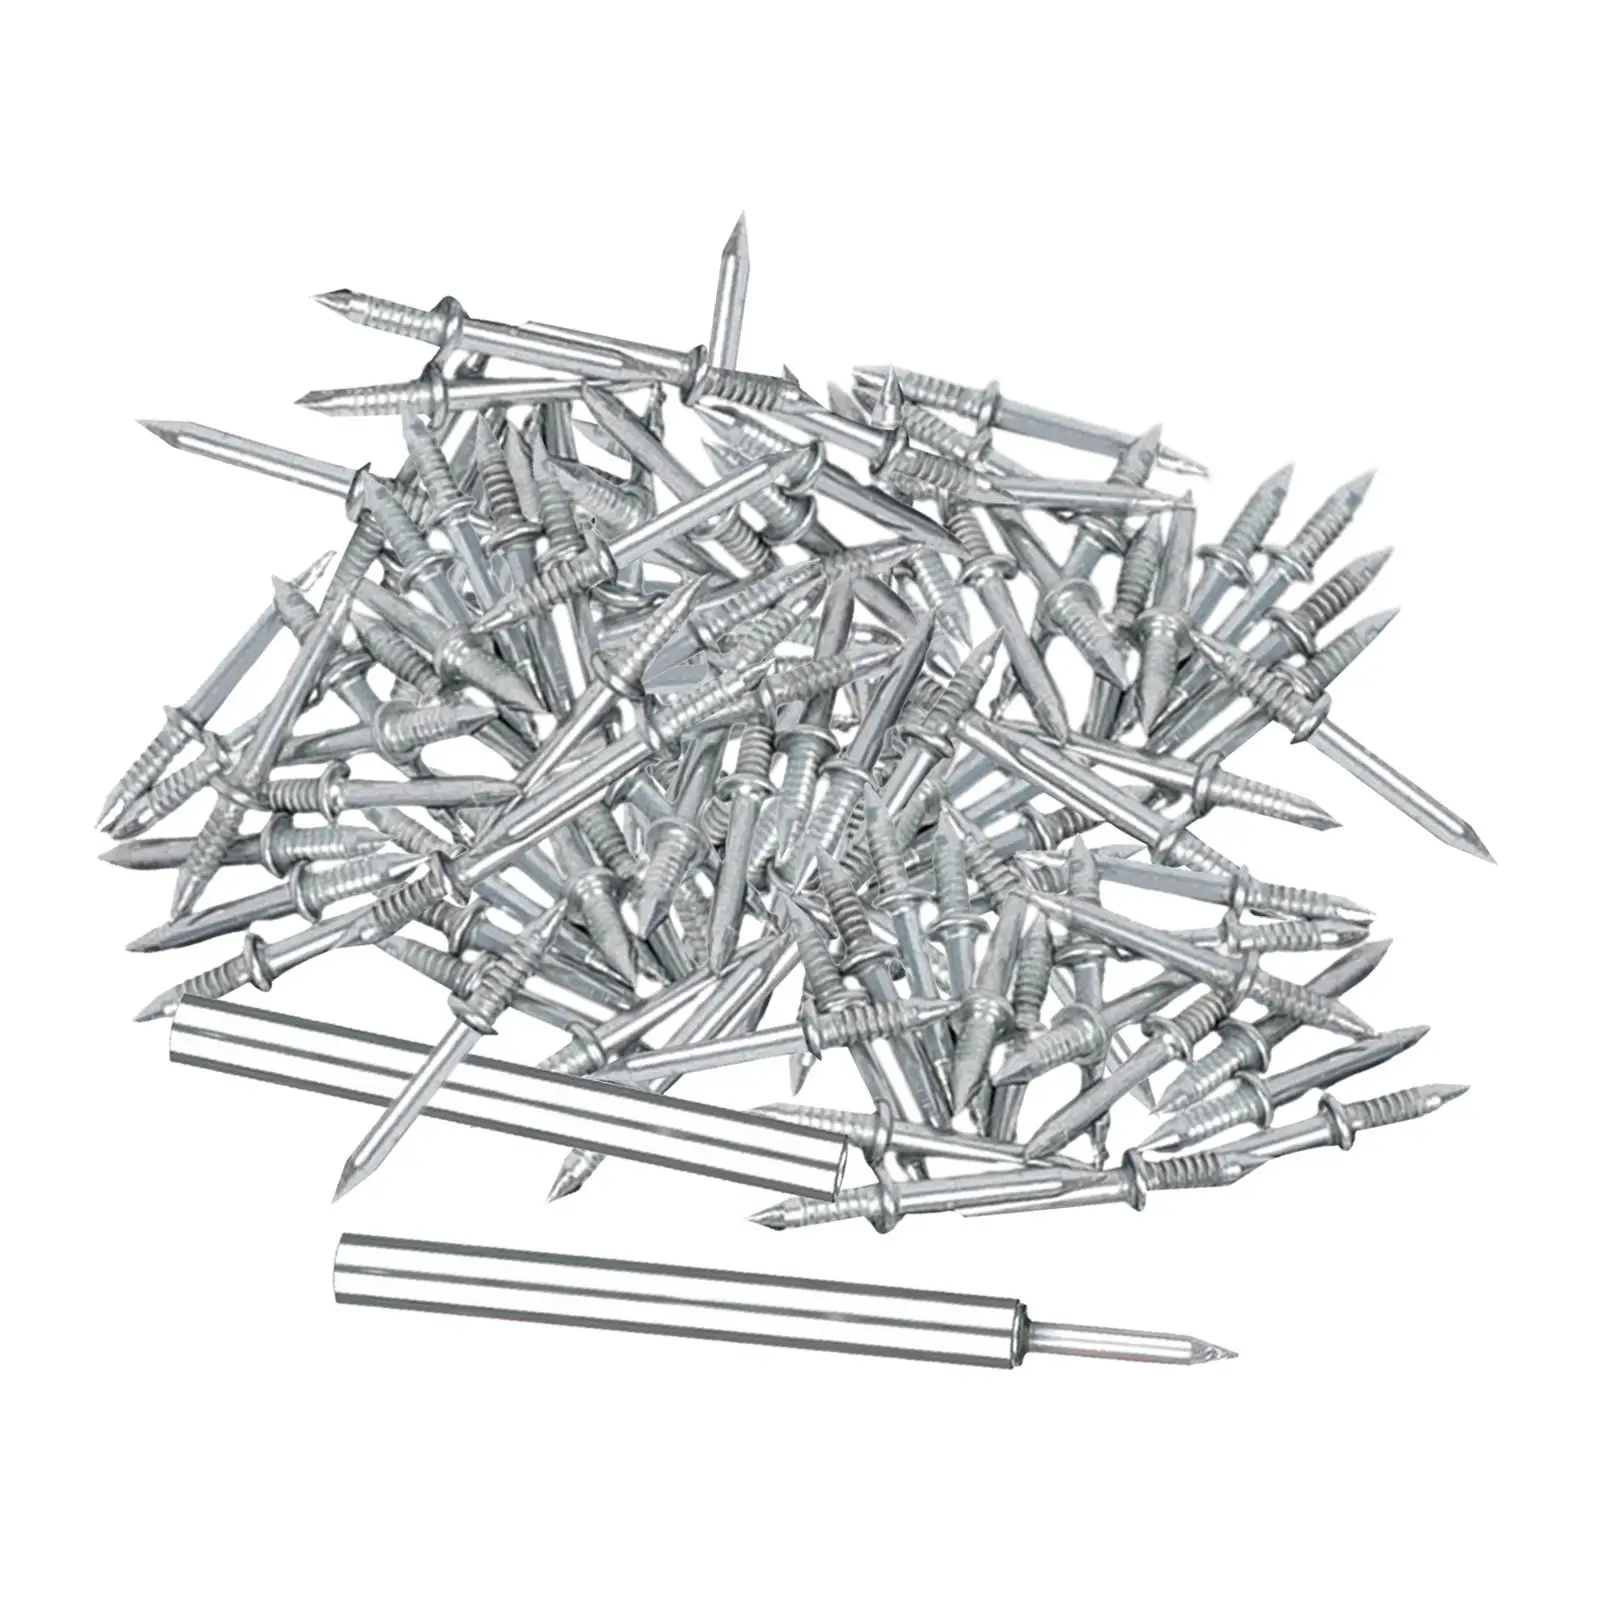 300 Pieces Double Headed Nails with Nail Specific Sleeve Tool Sofas Home Improvement Furniture Construction Chairs Seamless Nail